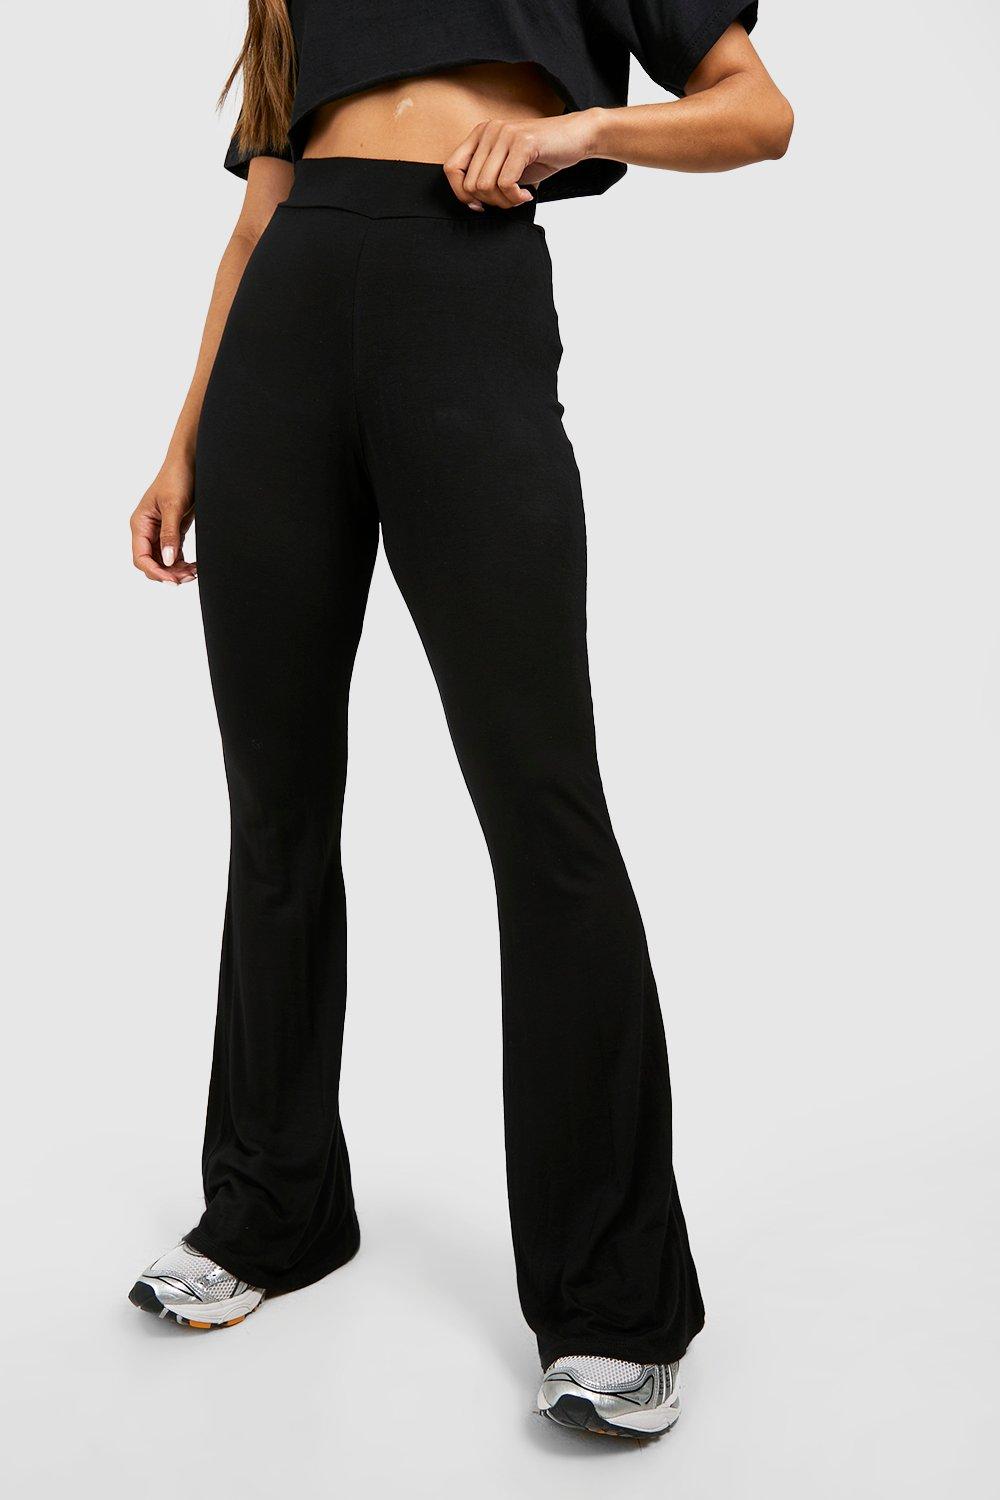 fit and flare black pants